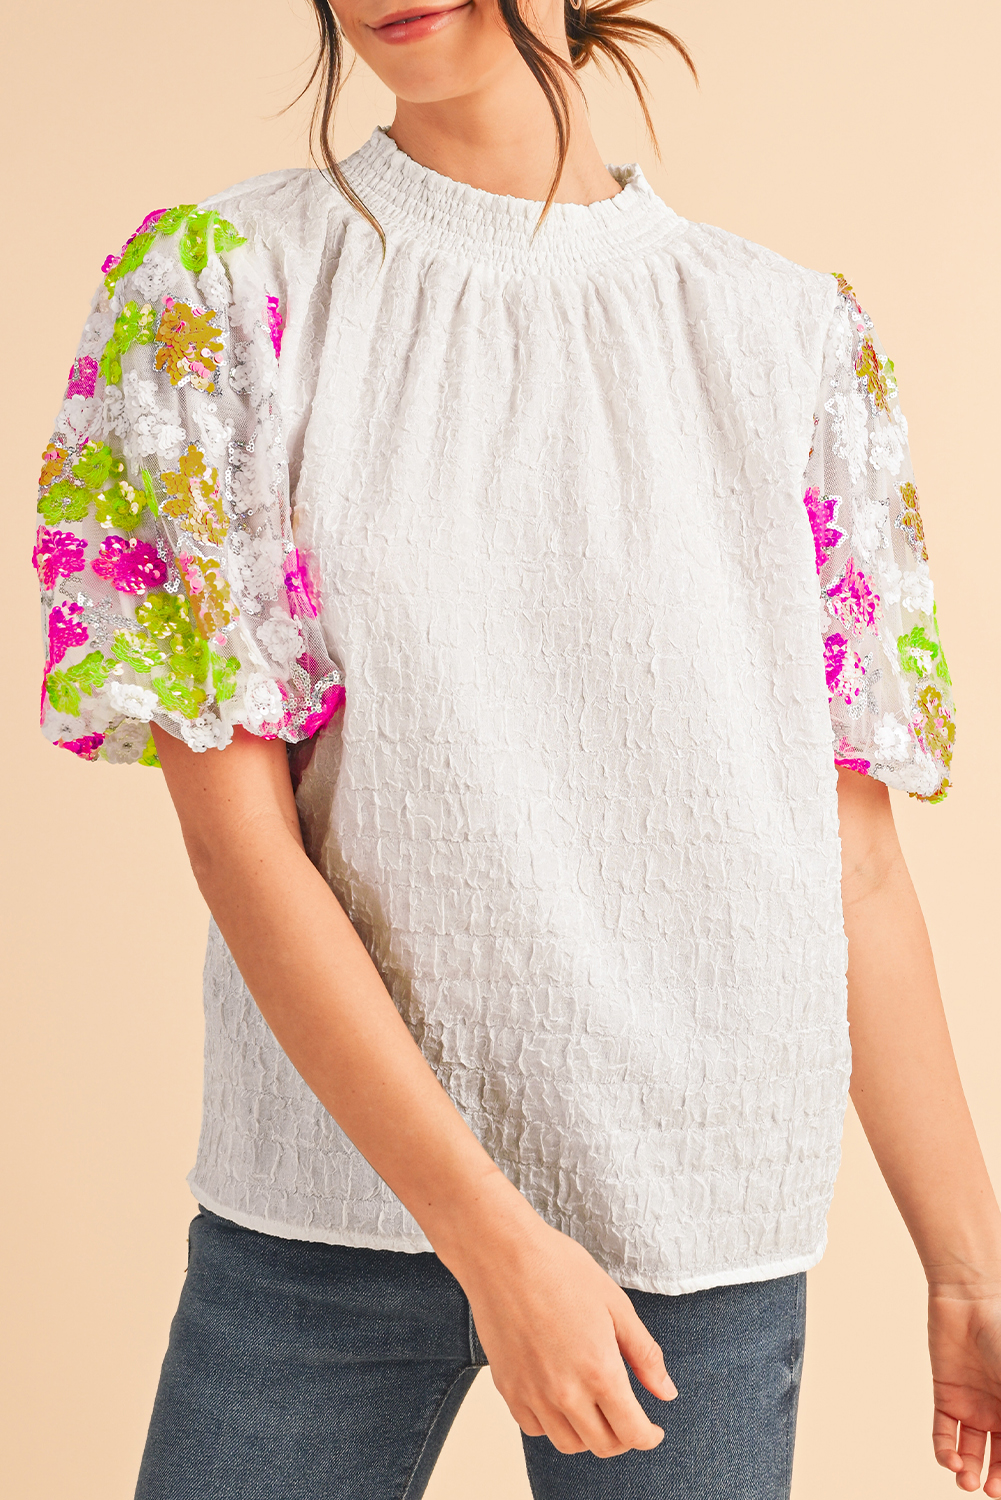 Shewin Wholesale Chic Female White Smocked Neck Sequin FLOWER Puff Sleeve Textured Top